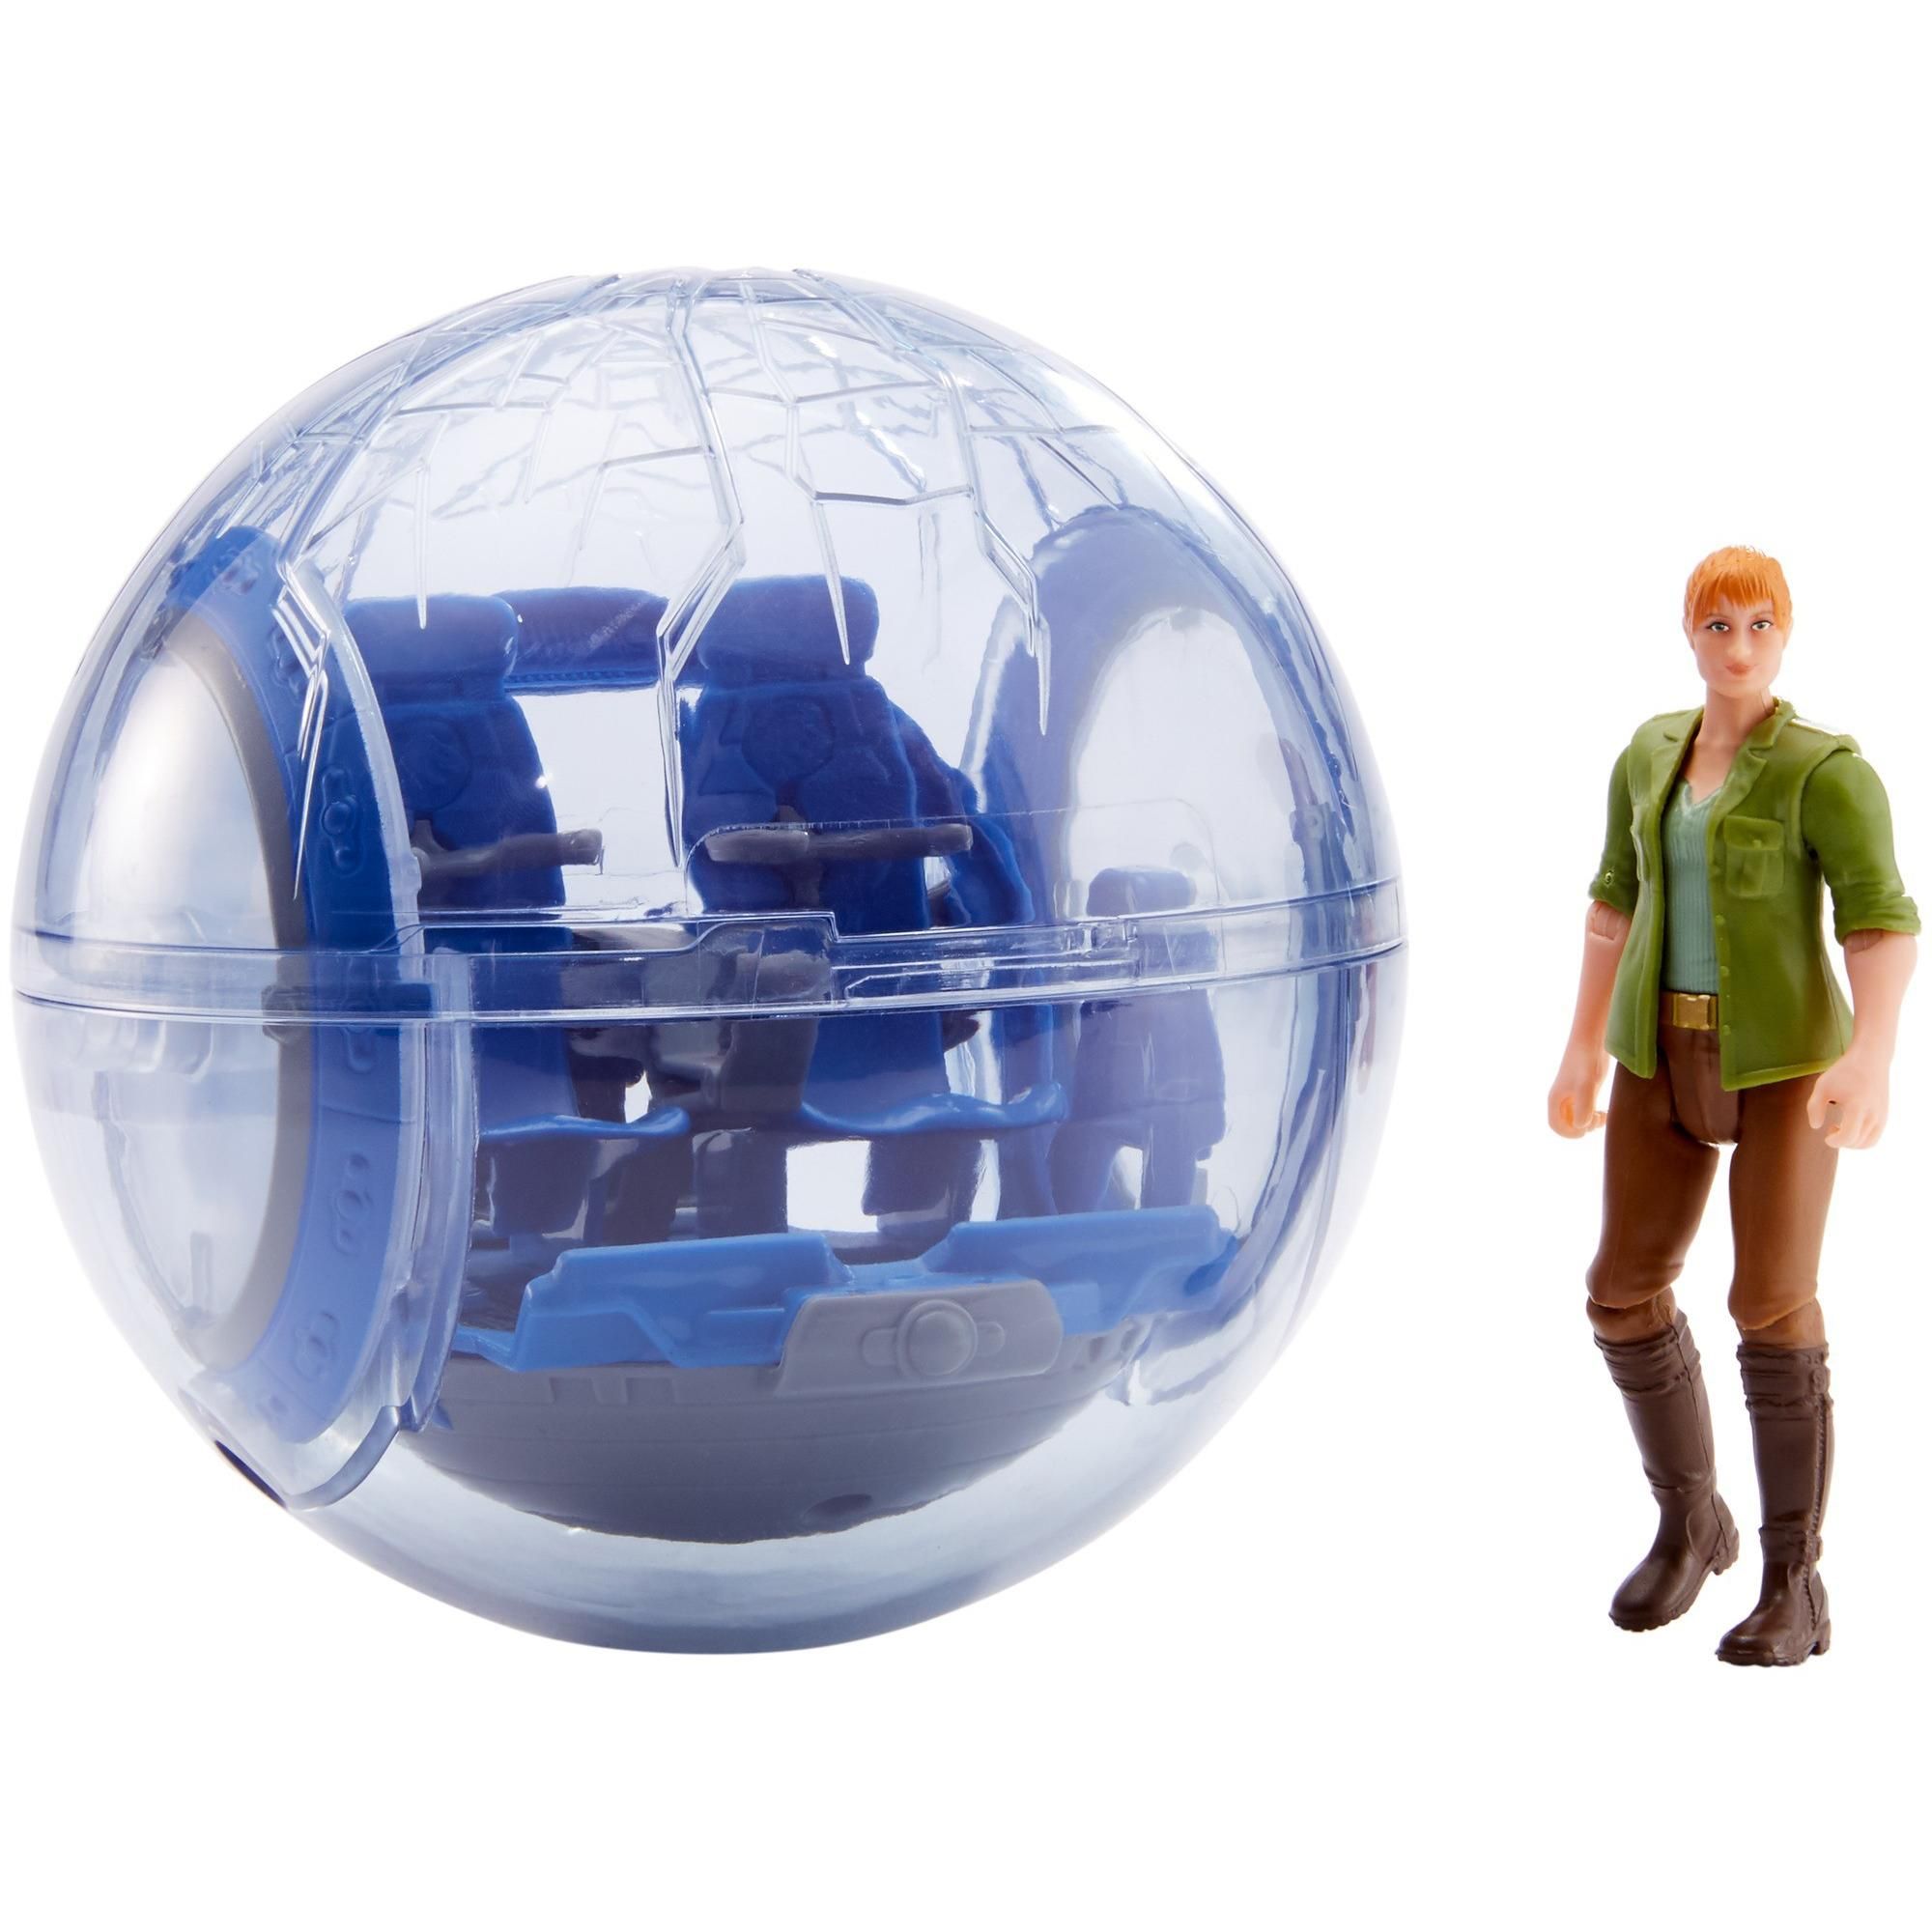 Grab this Gyrosphere toy (which comes with a Claire action figure!)&nbs...